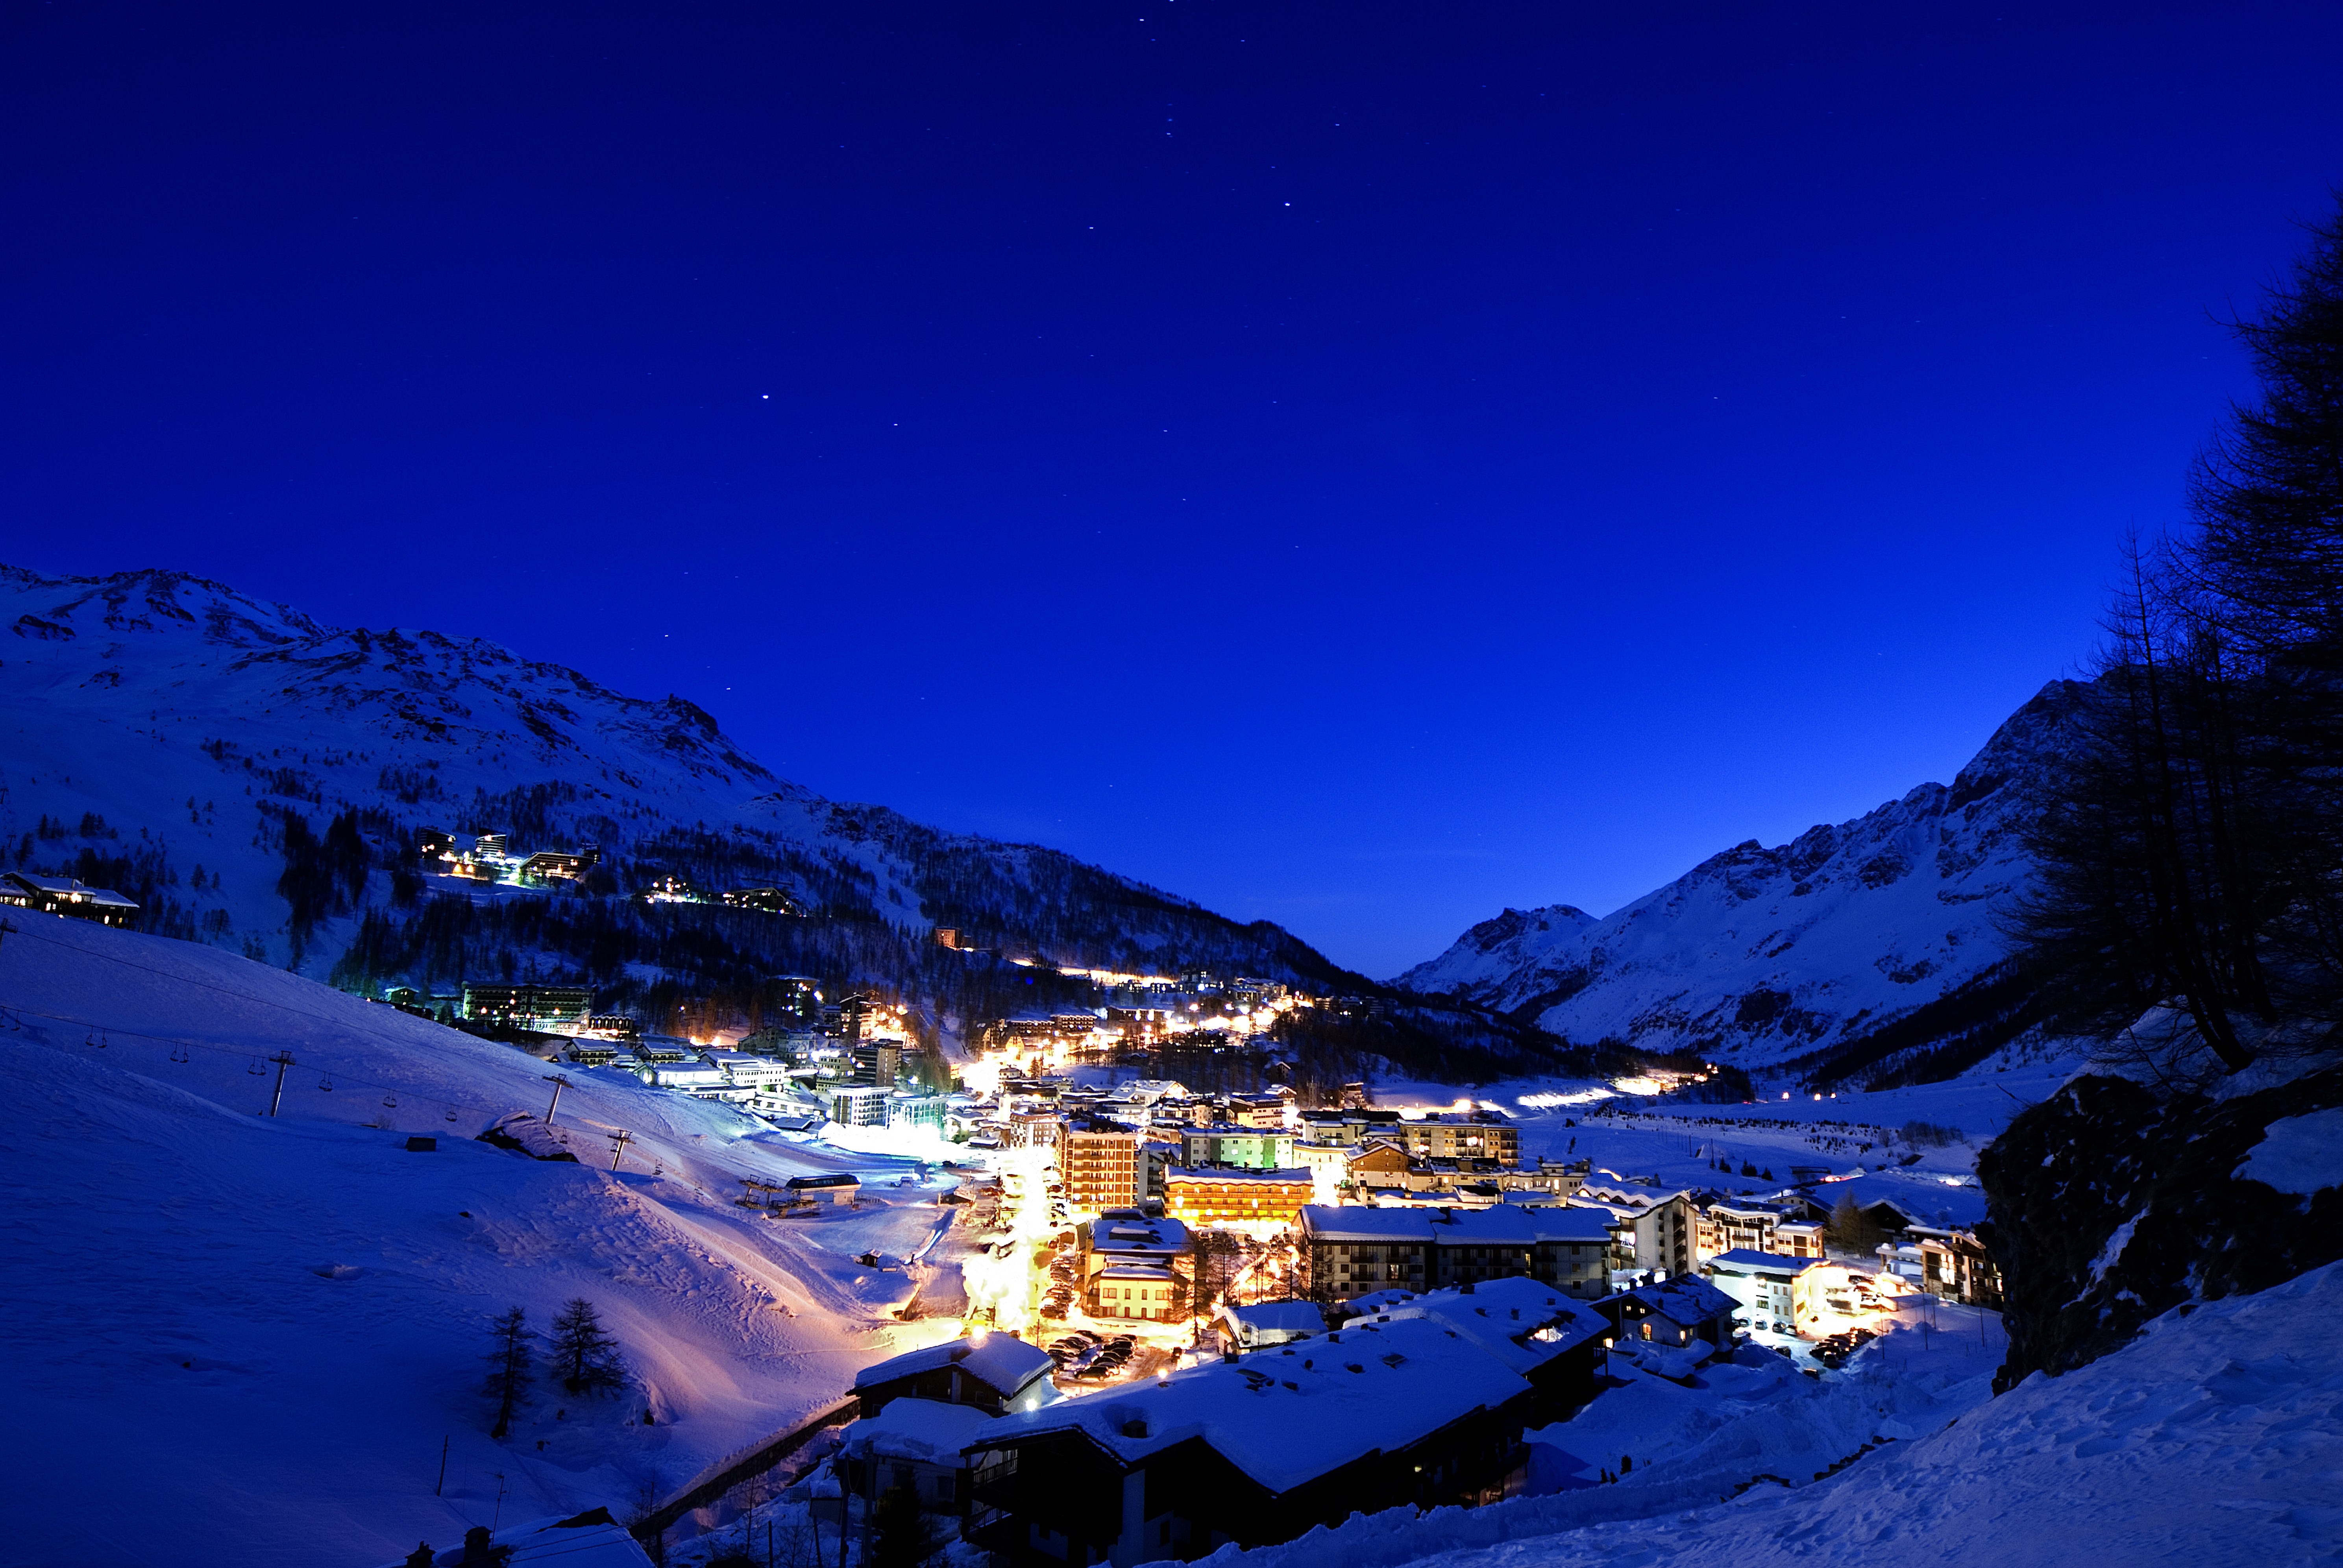  ski resort of Cervinia Italy wallpapers and images   wallpapers